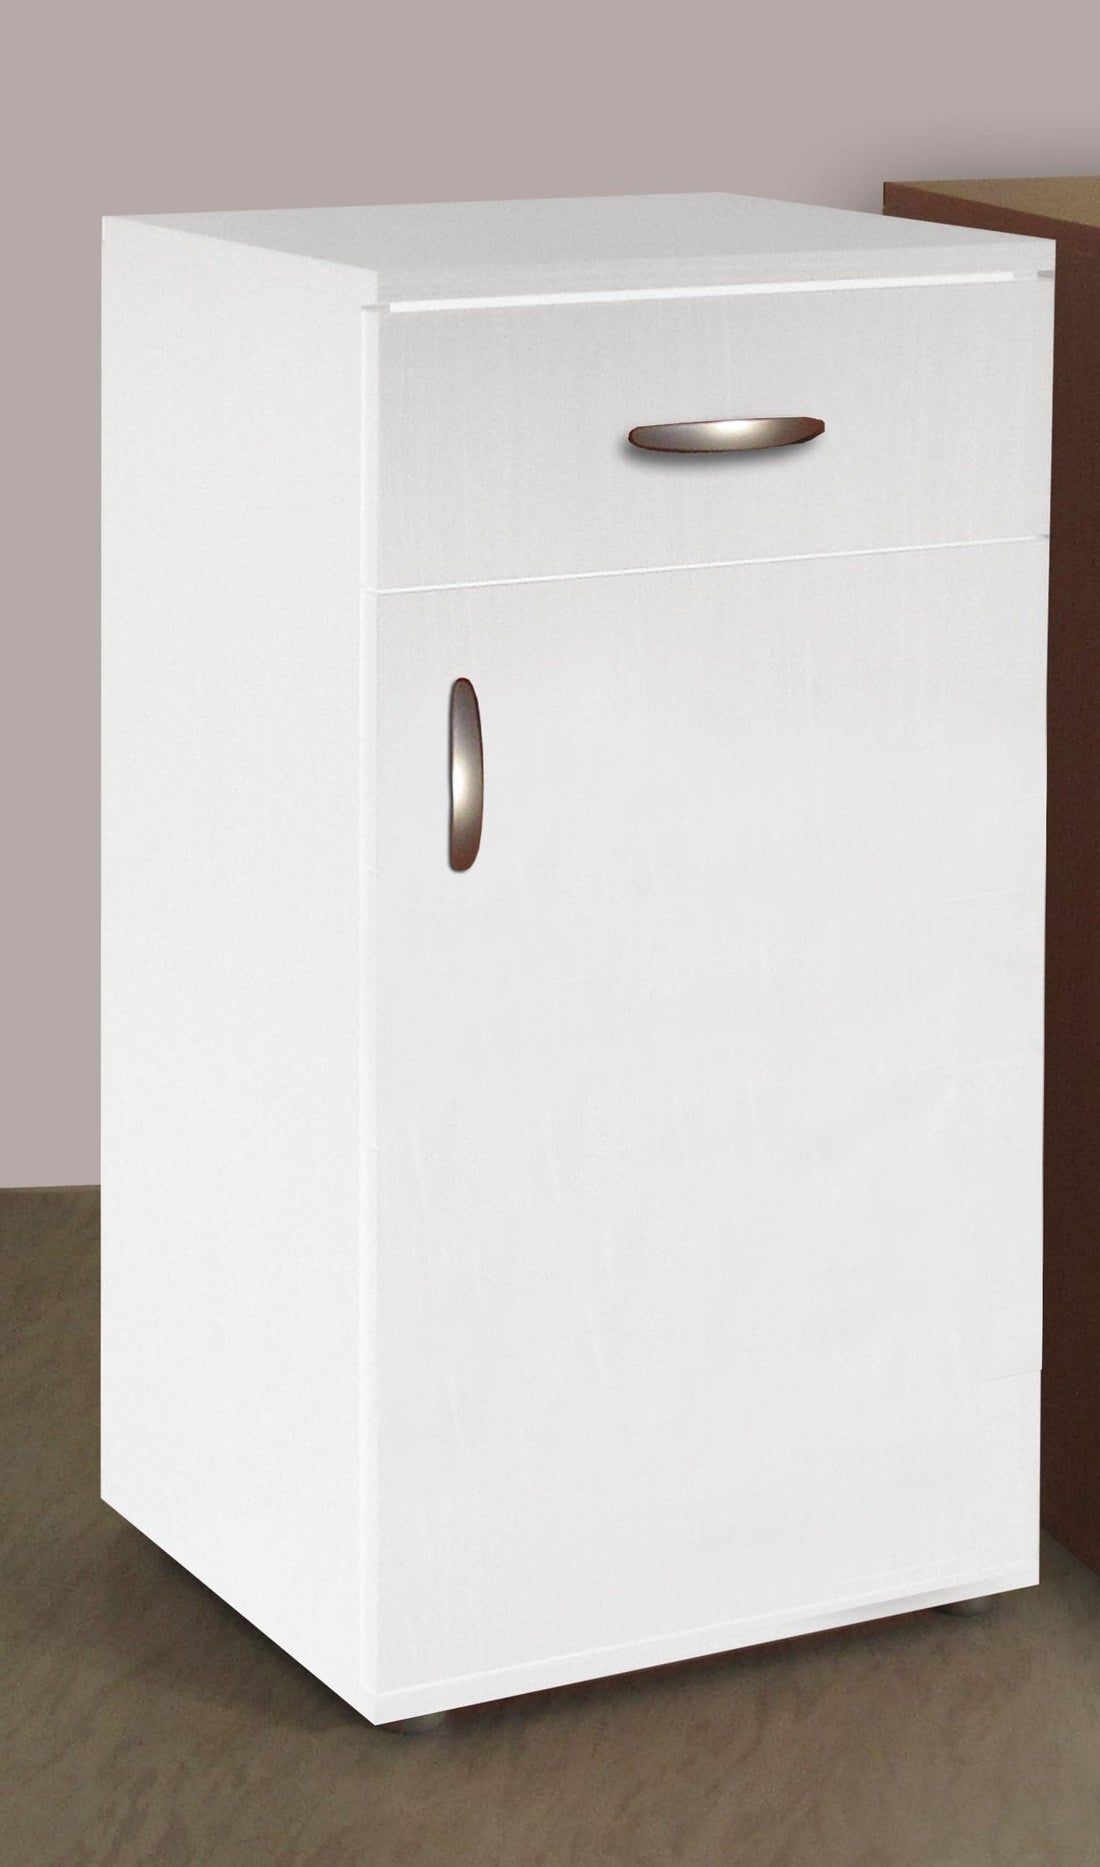 BASE UNIT 1 DOOR AND 1 DRAWER 45X40X85H WHITE - best price from Maltashopper.com BR440002618